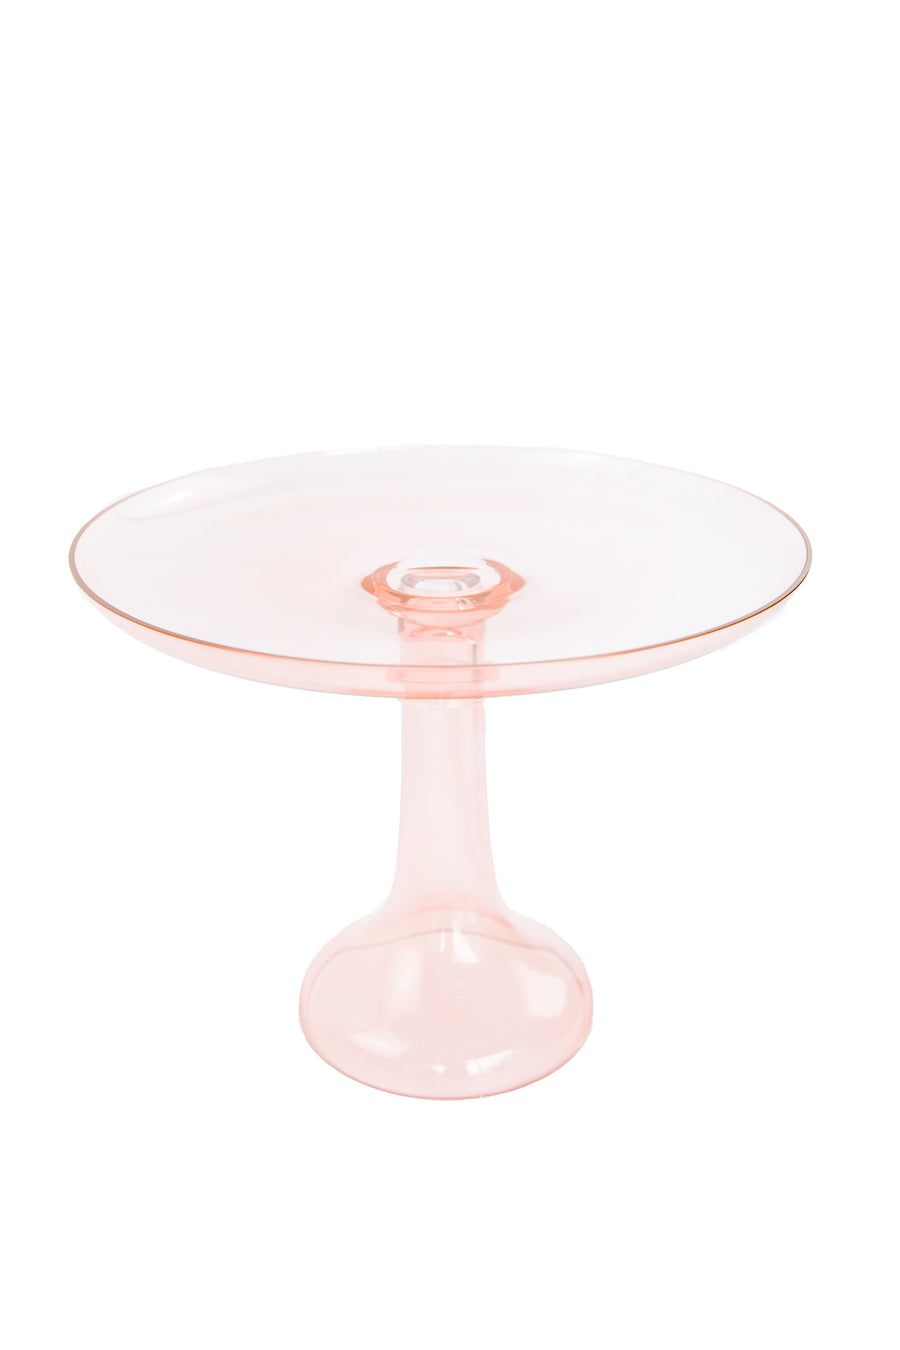 Colored Glass Cake Stand